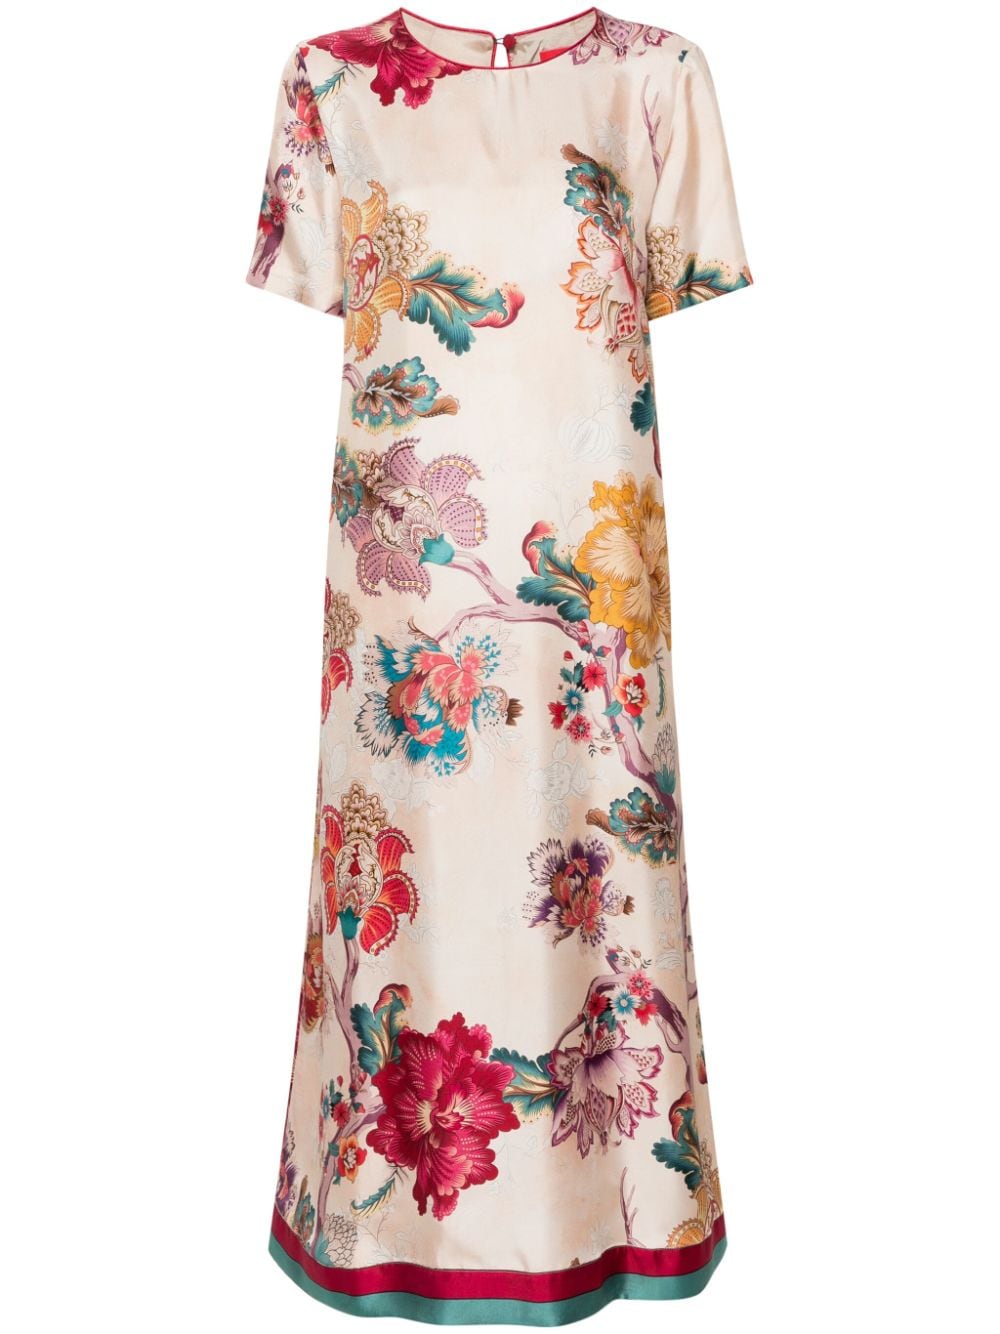 Pink Floral Print Silk Long Dress with Torchon Piping Detail and Short Sleeves